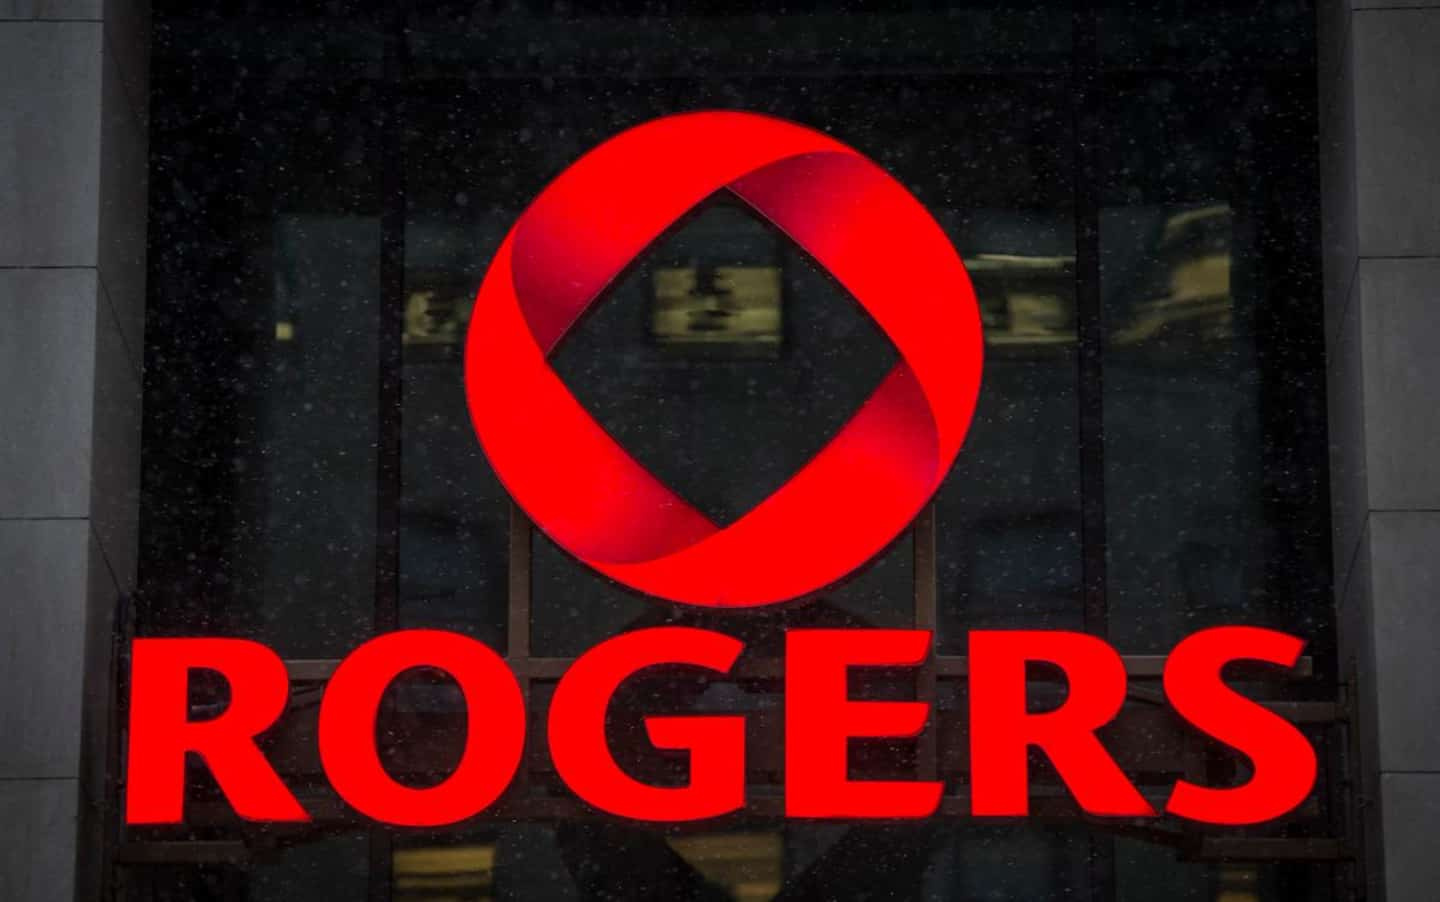 Major outage: Rogers unable to transfer customers to competitors